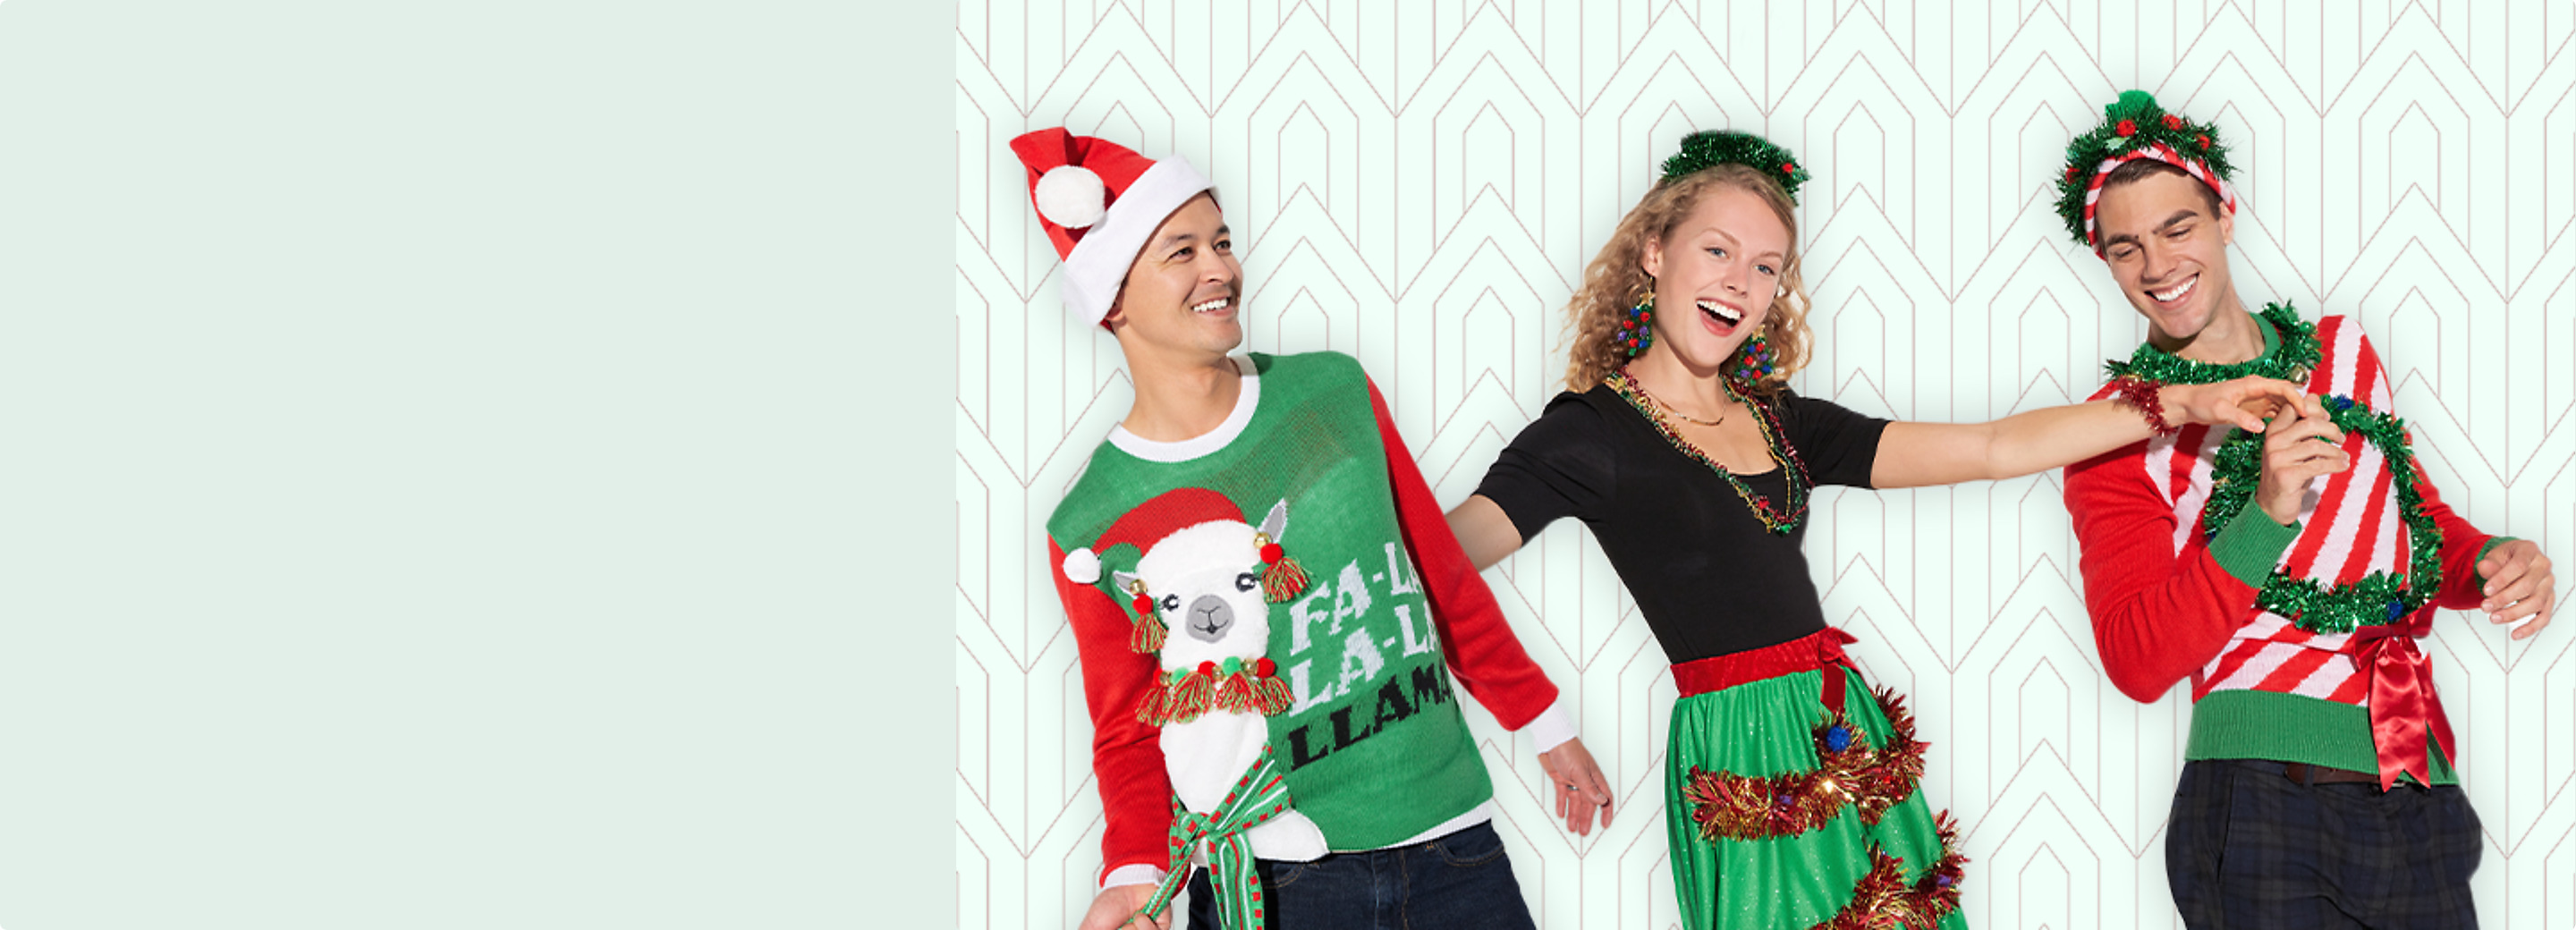 Two men and a woman posing together wearing Christmas themed sweaters and accessories including a red felt Santa hat.